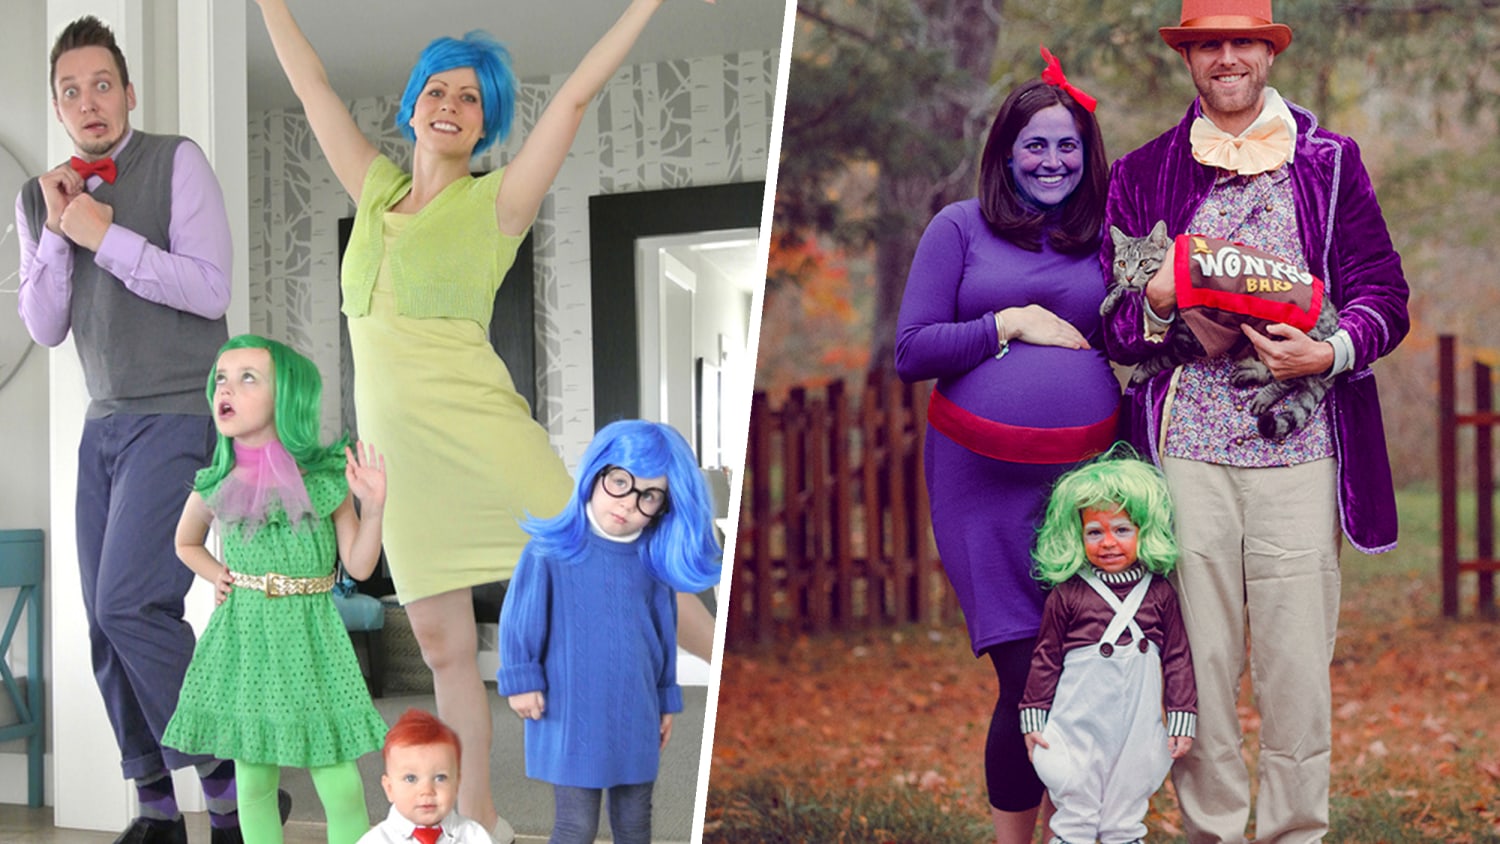 Family Halloween costumes: 8 Pinterest ideas to inspire you - TODAY.com.